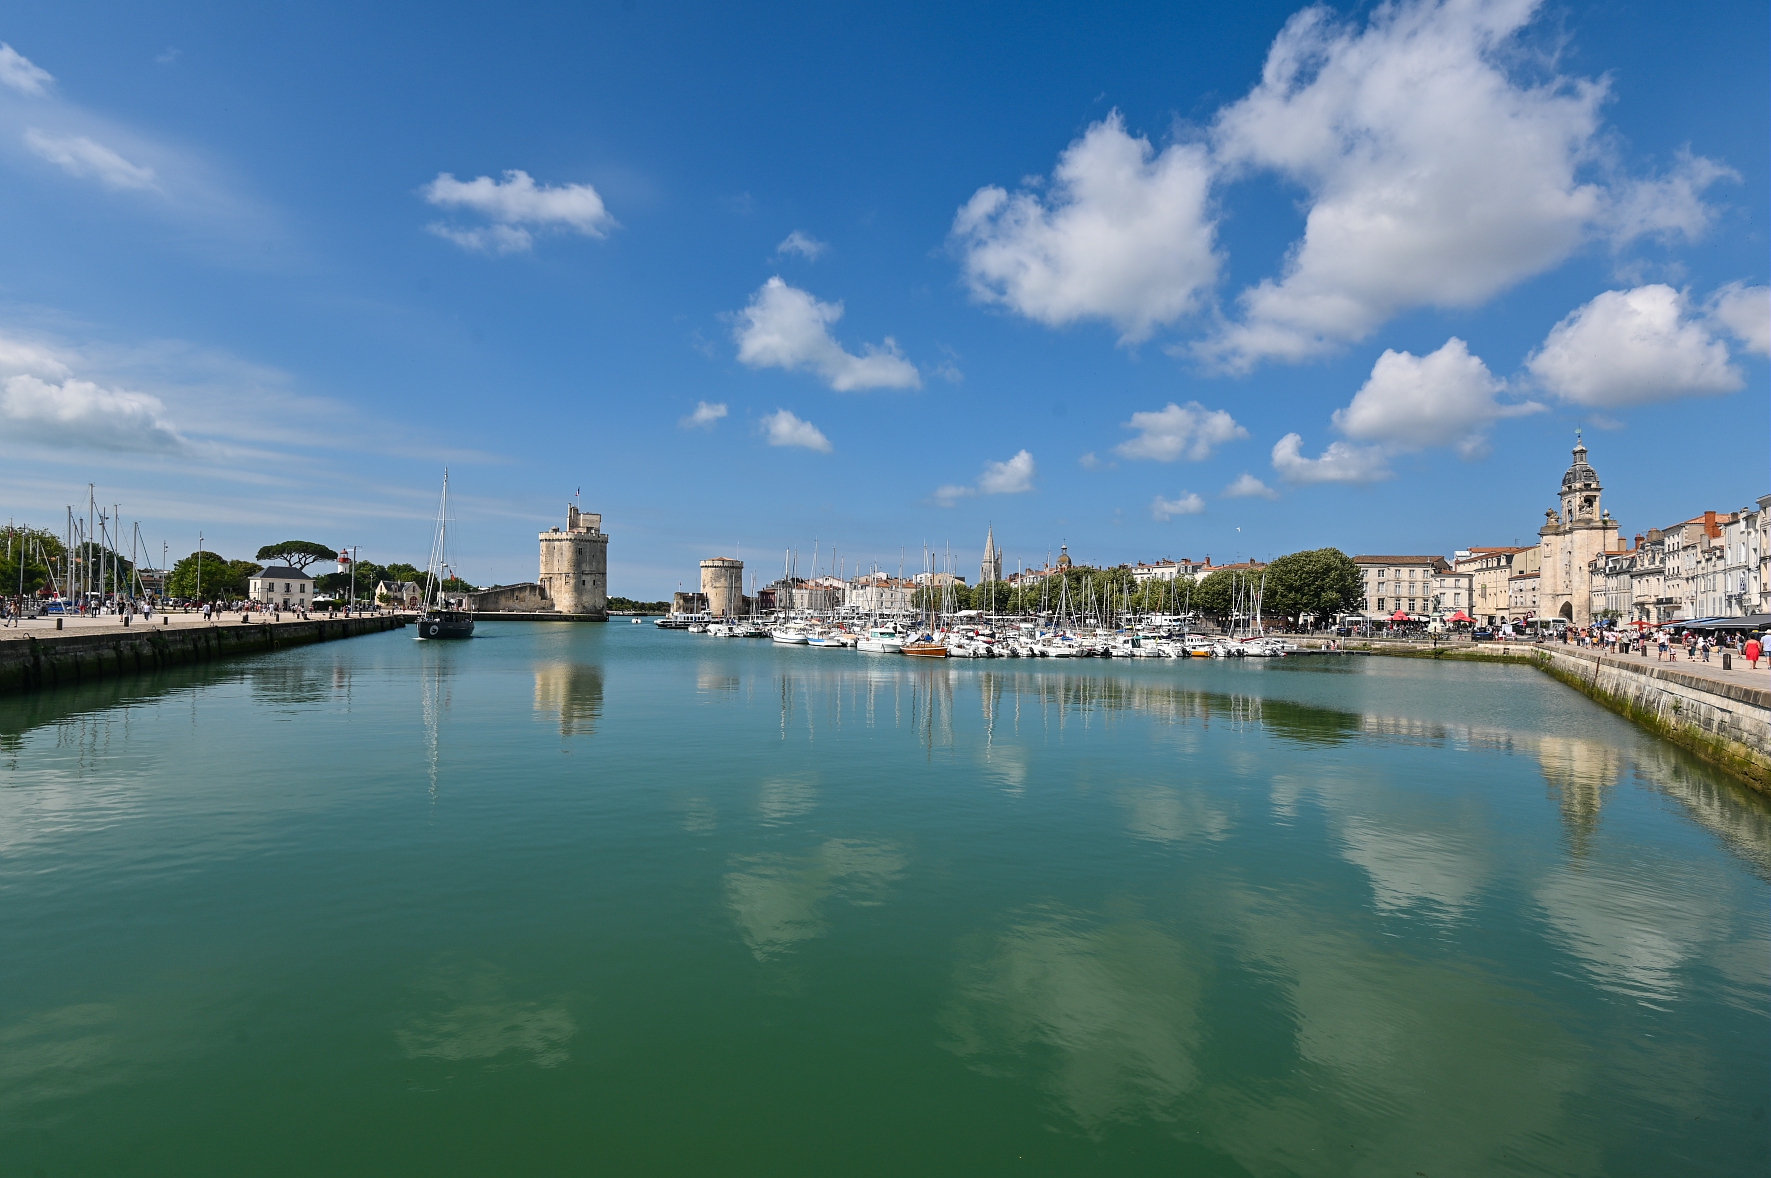 The Race Around - La Rochelle named as host city for 2023 and beyond